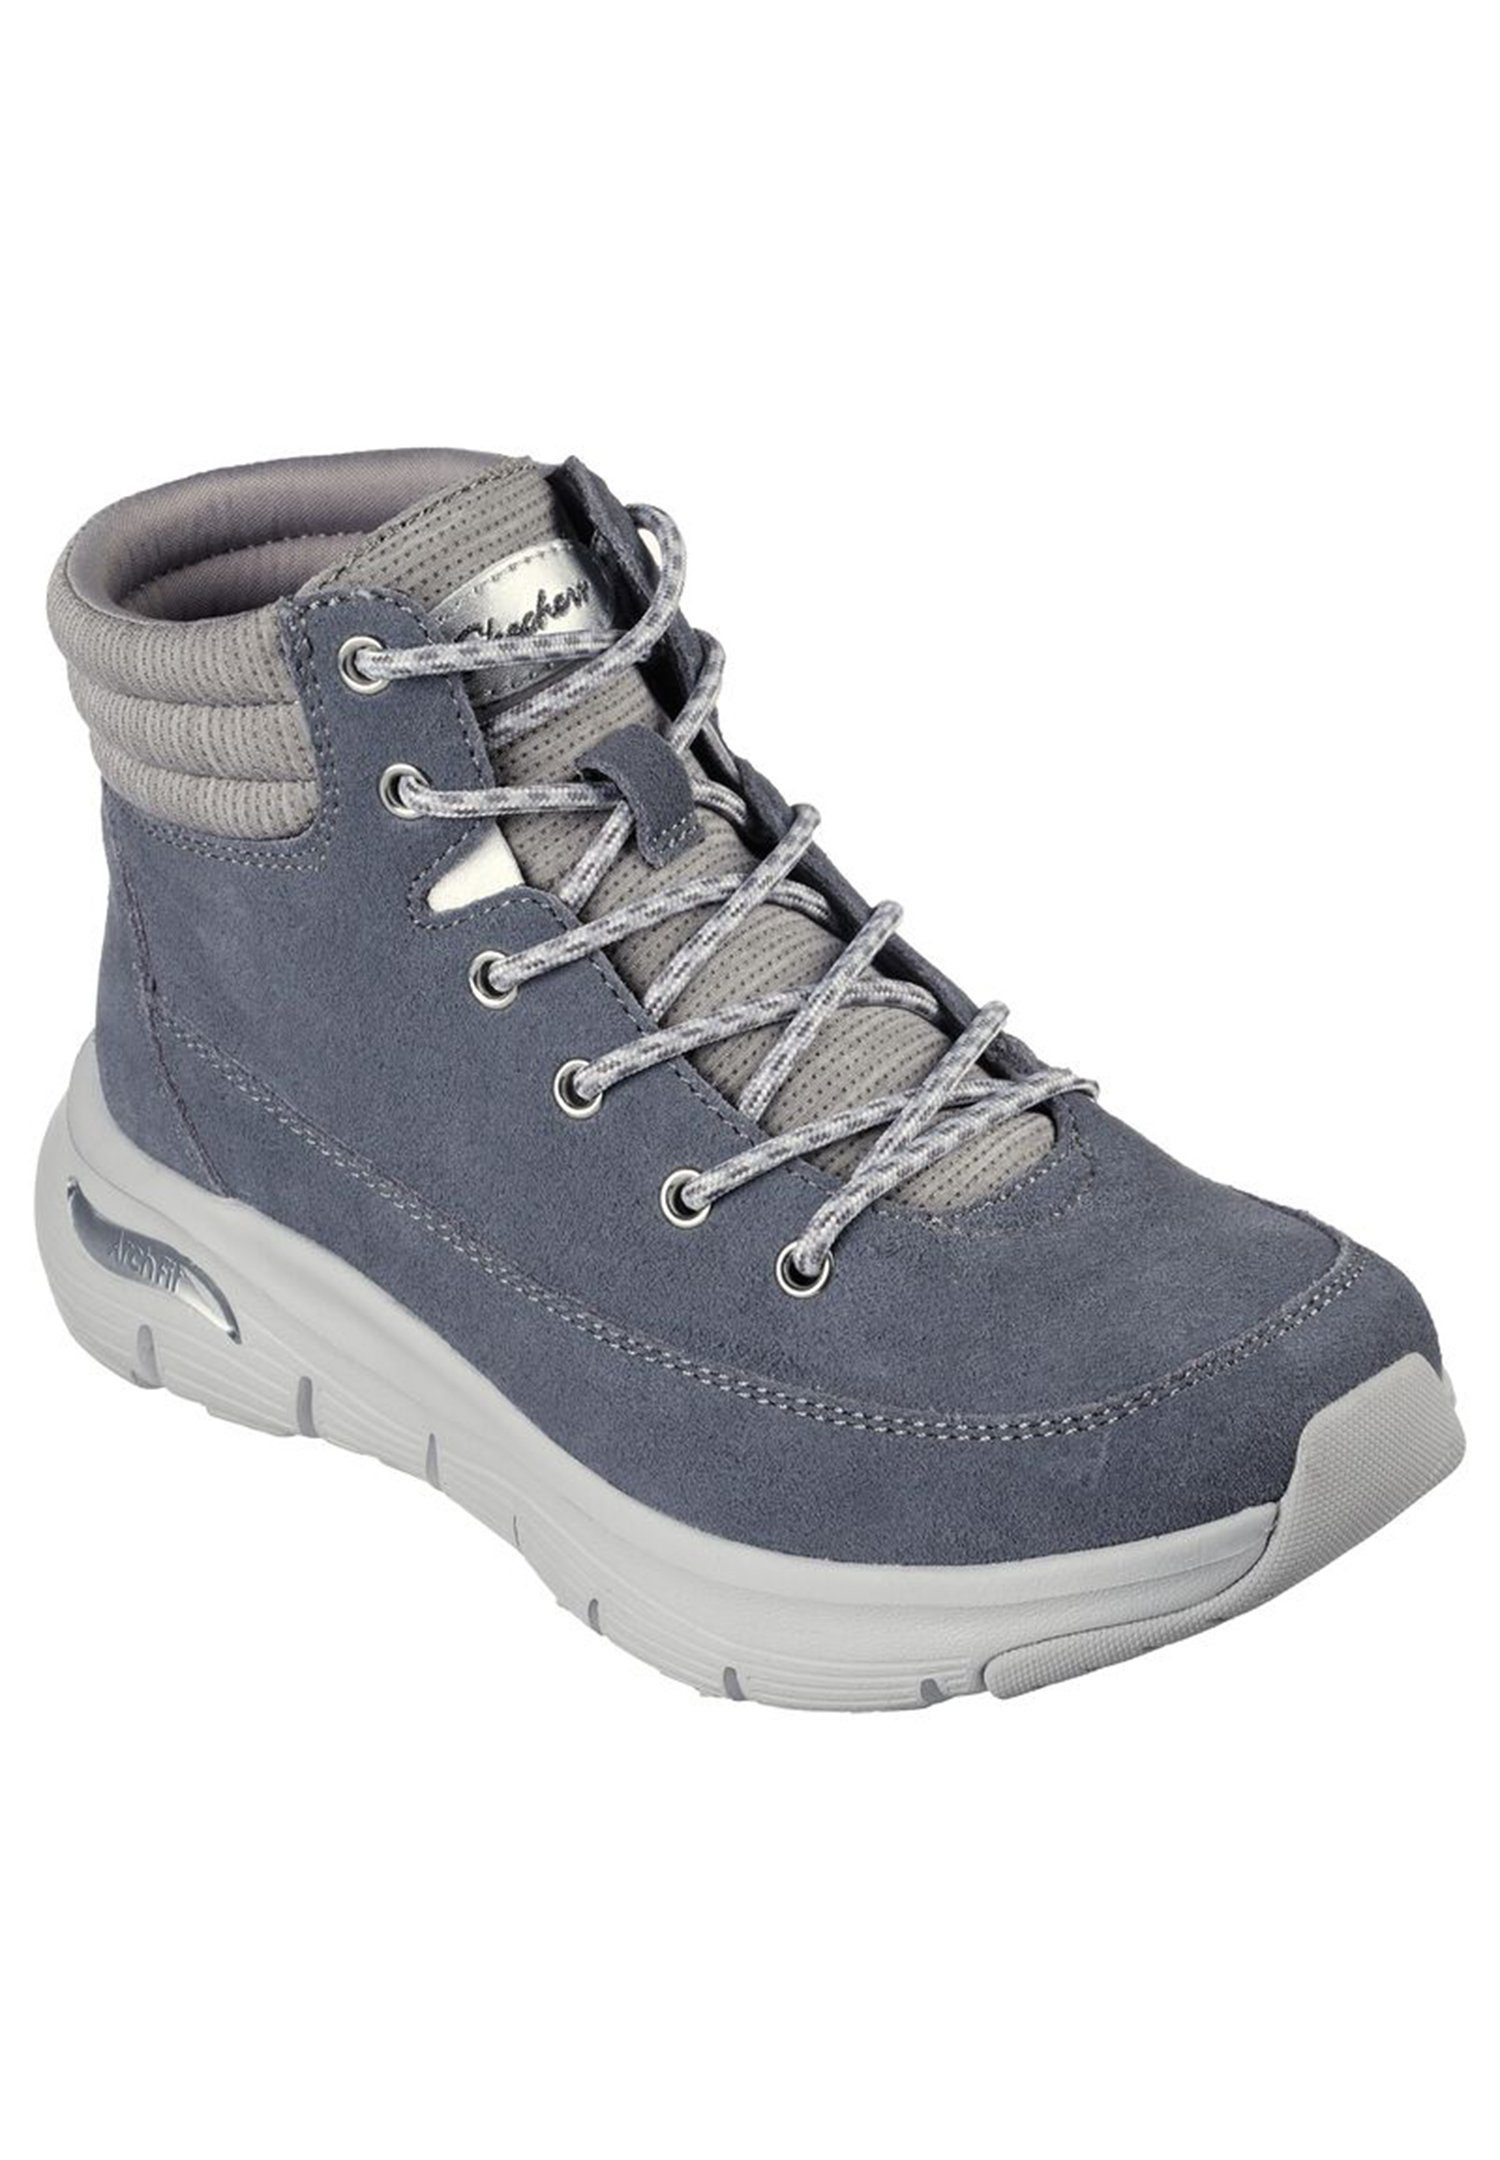 CHILL Skechers Arch Fit Stiefel COMFY Smooth